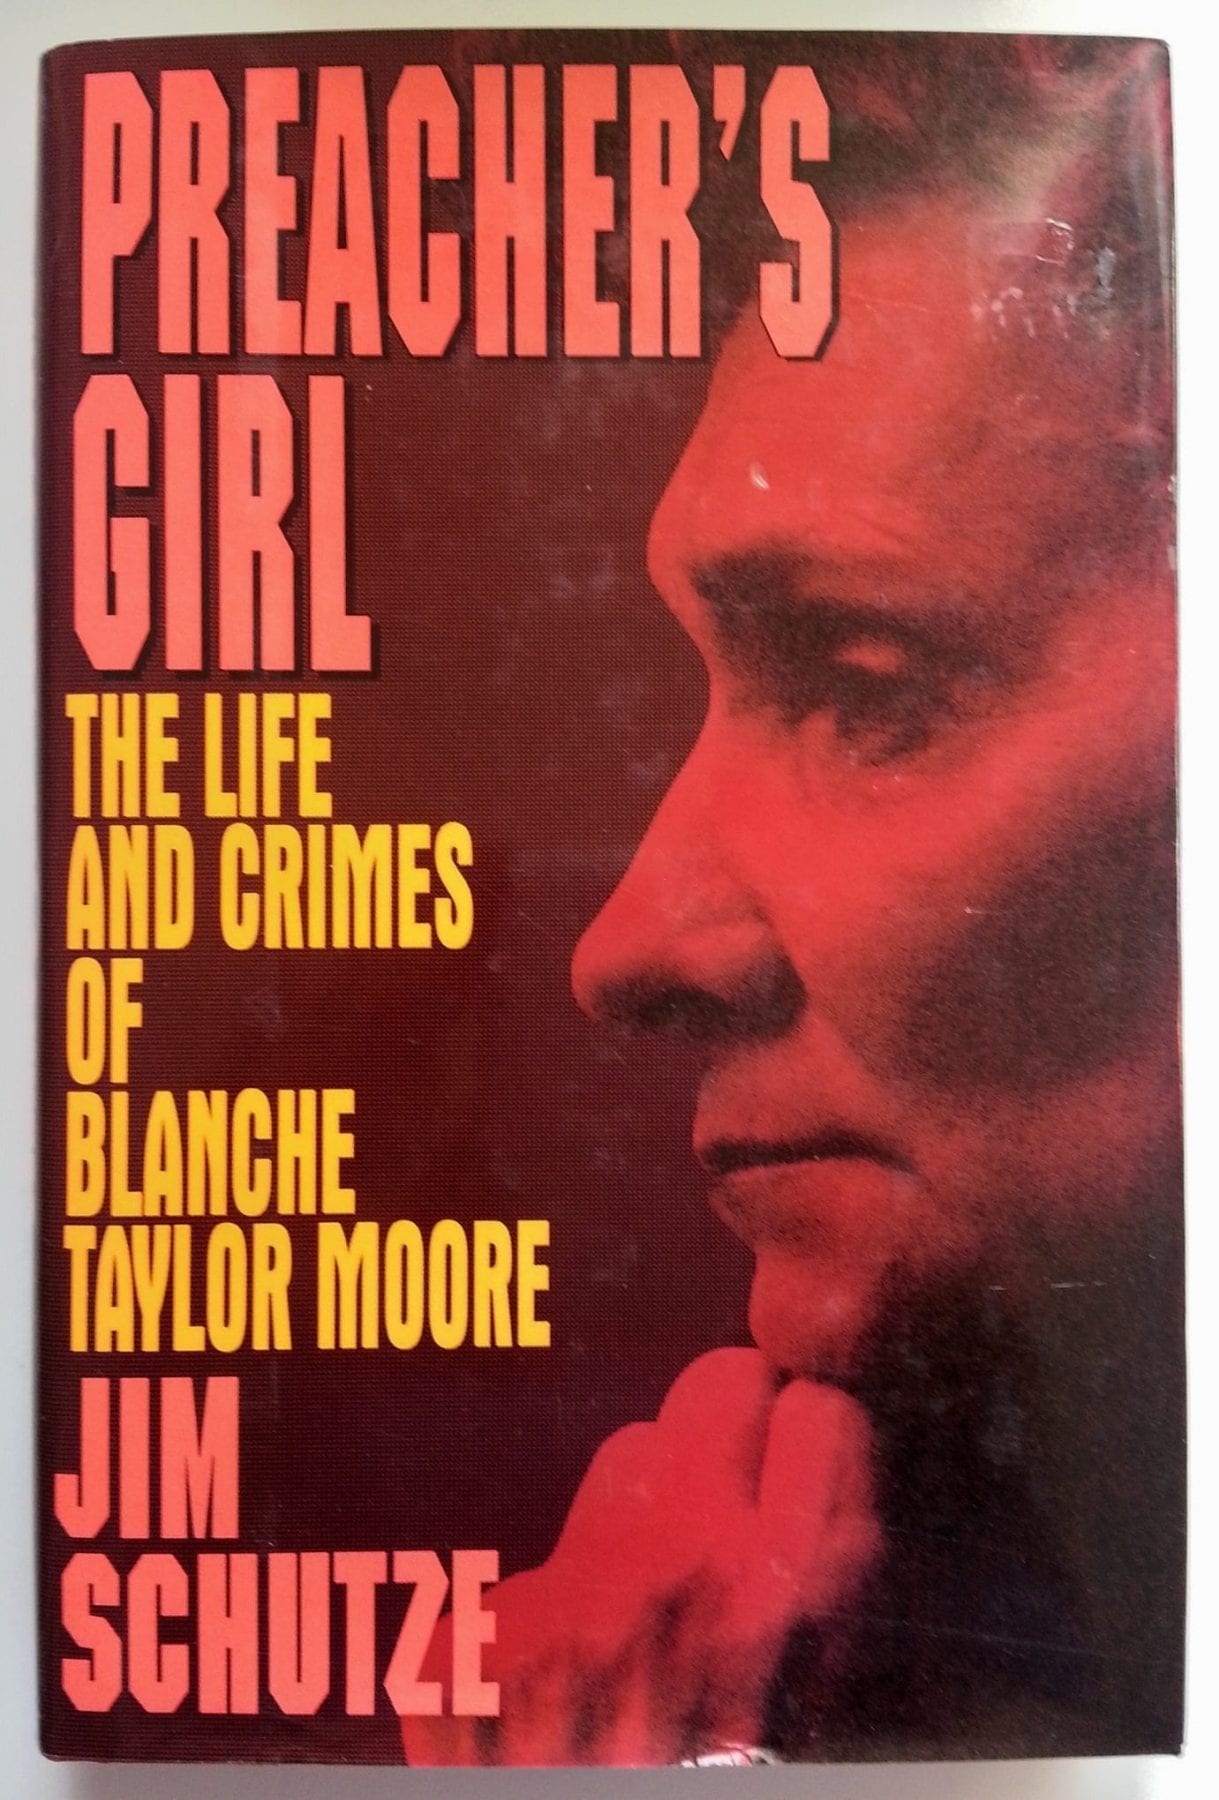 Cover of Preacher’s Girl- The Life and Crimes of Blanche Taylor Moore by Jim Schutze